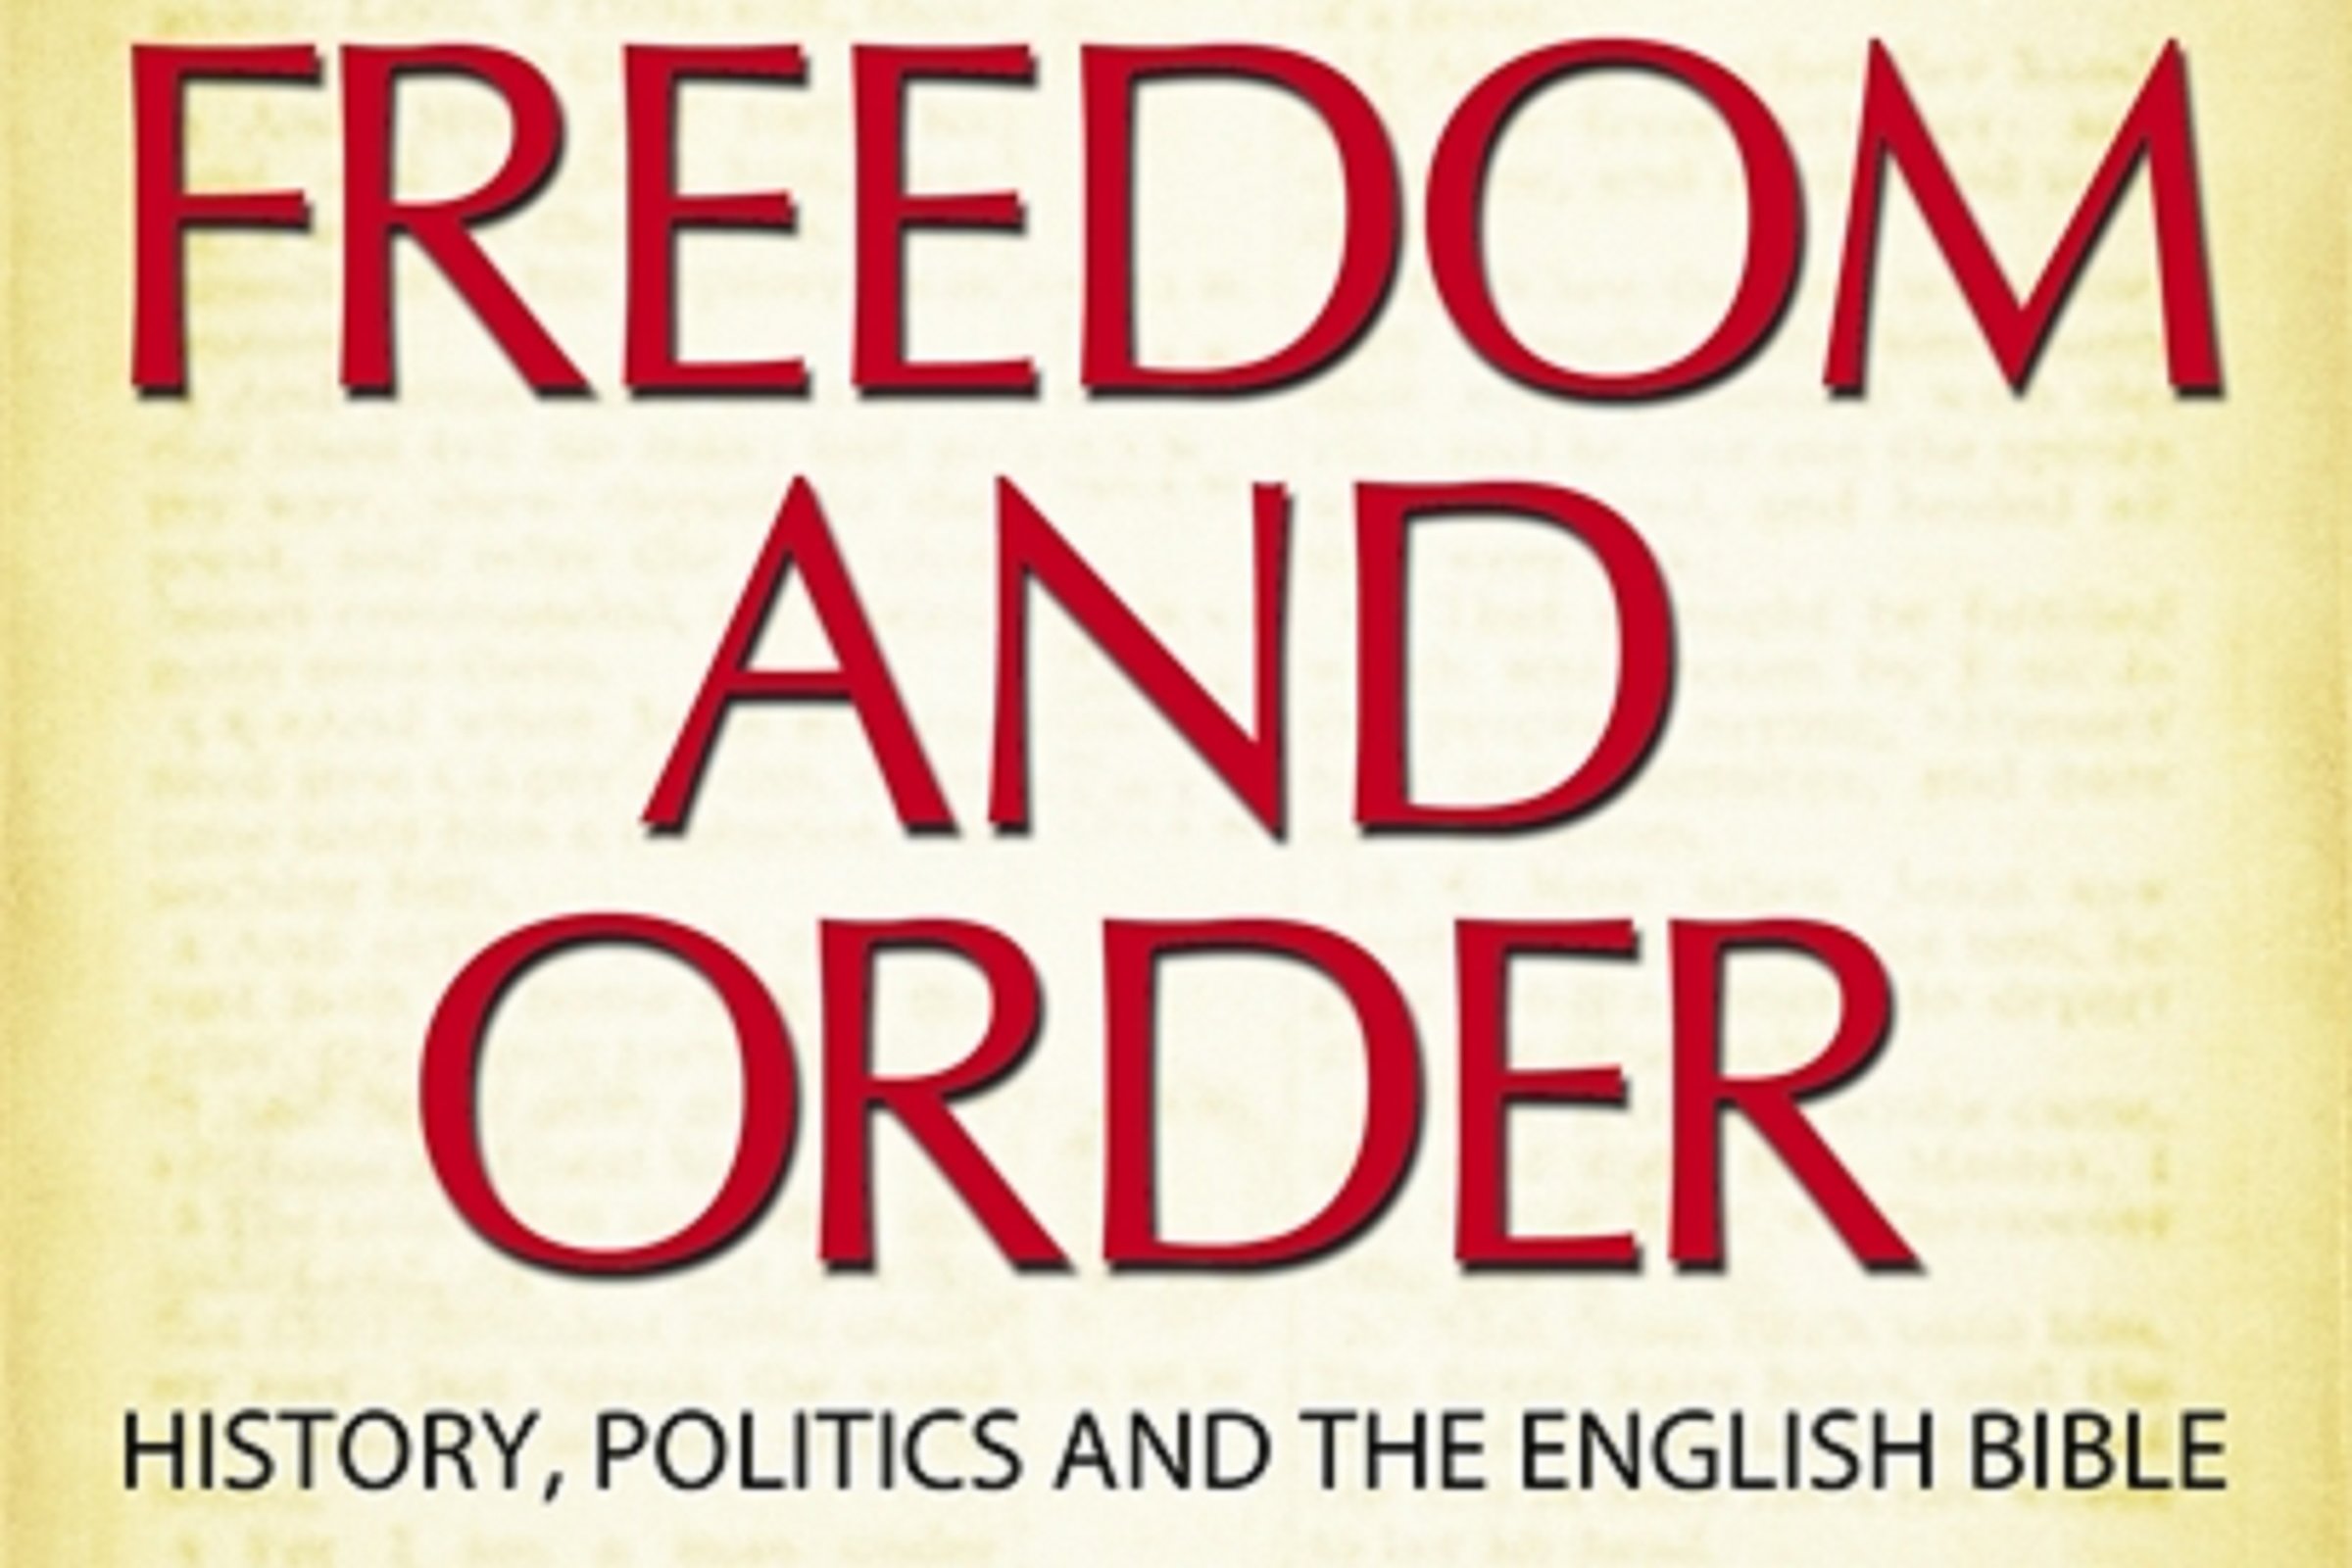 Freedom and Order: History, Politics and the English Bible